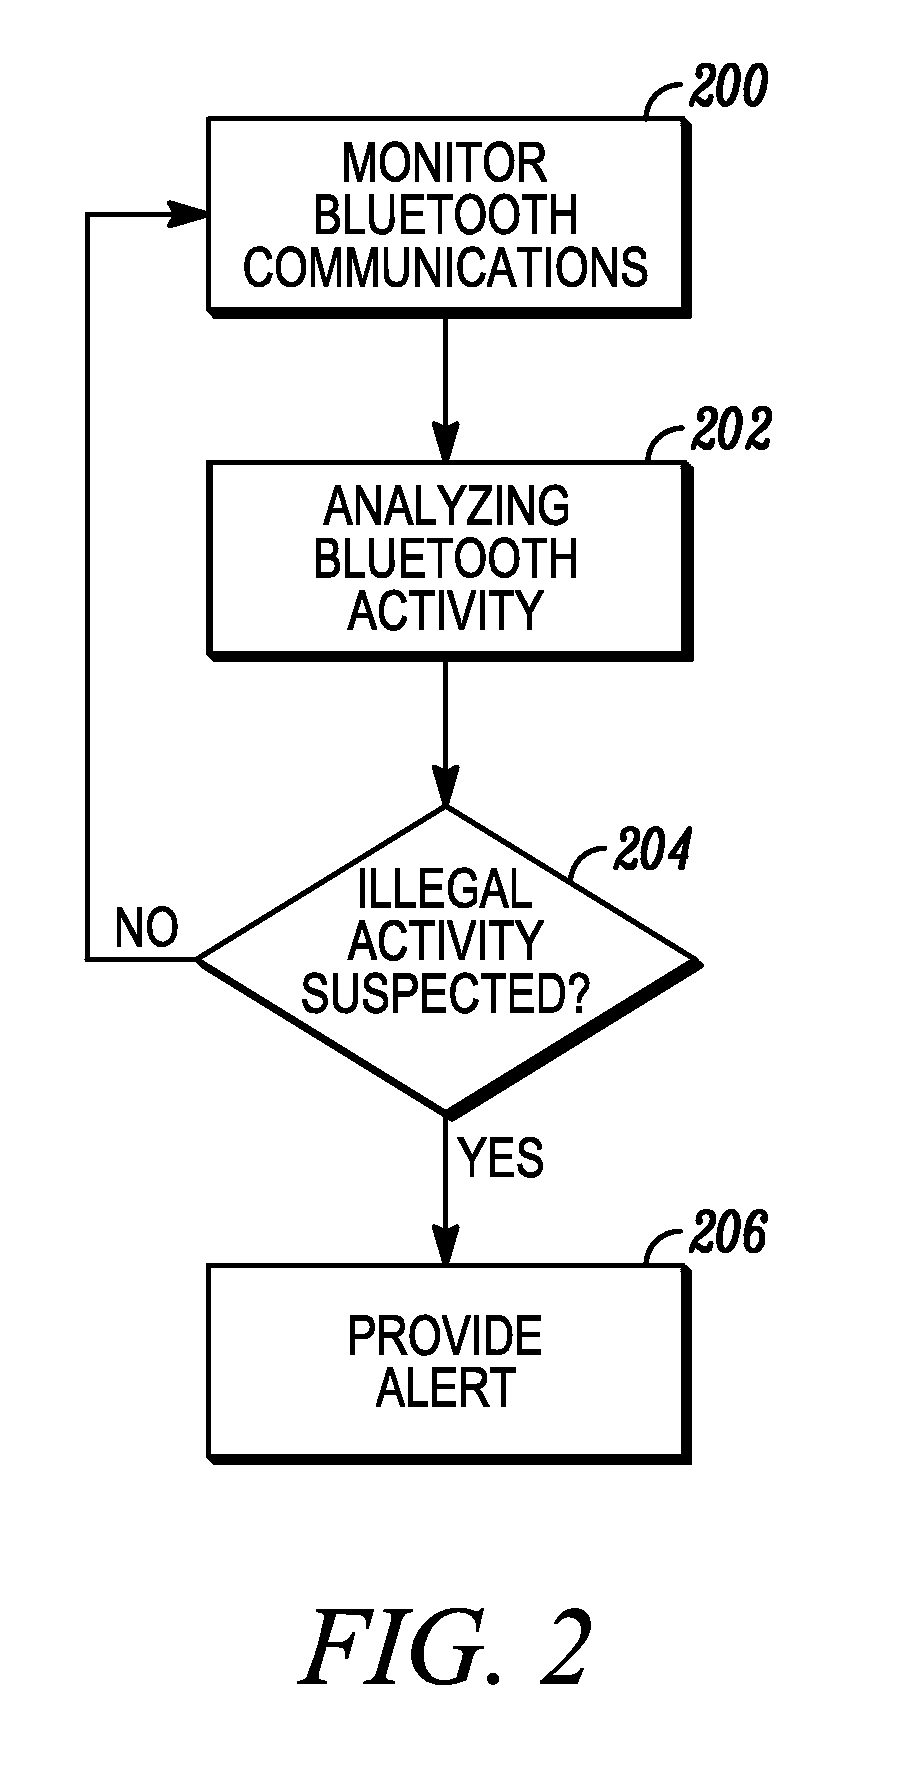 Detection of an unauthorized wireless communication device